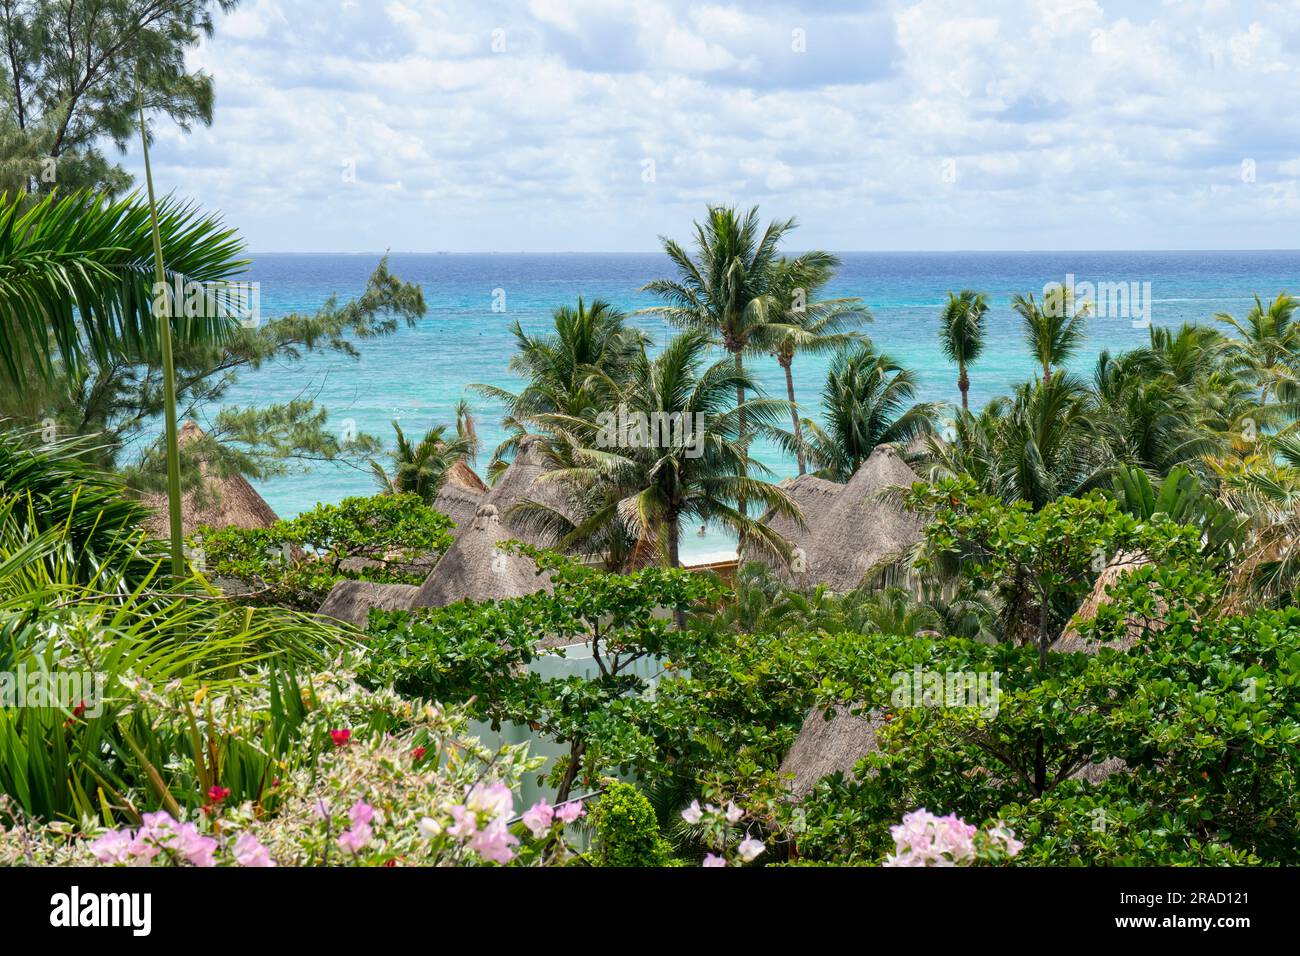 Aerial view of a landscape with tropical plants and flowers facing the sea, in the background the Mar de Caribbean in Mexico Stock Photo